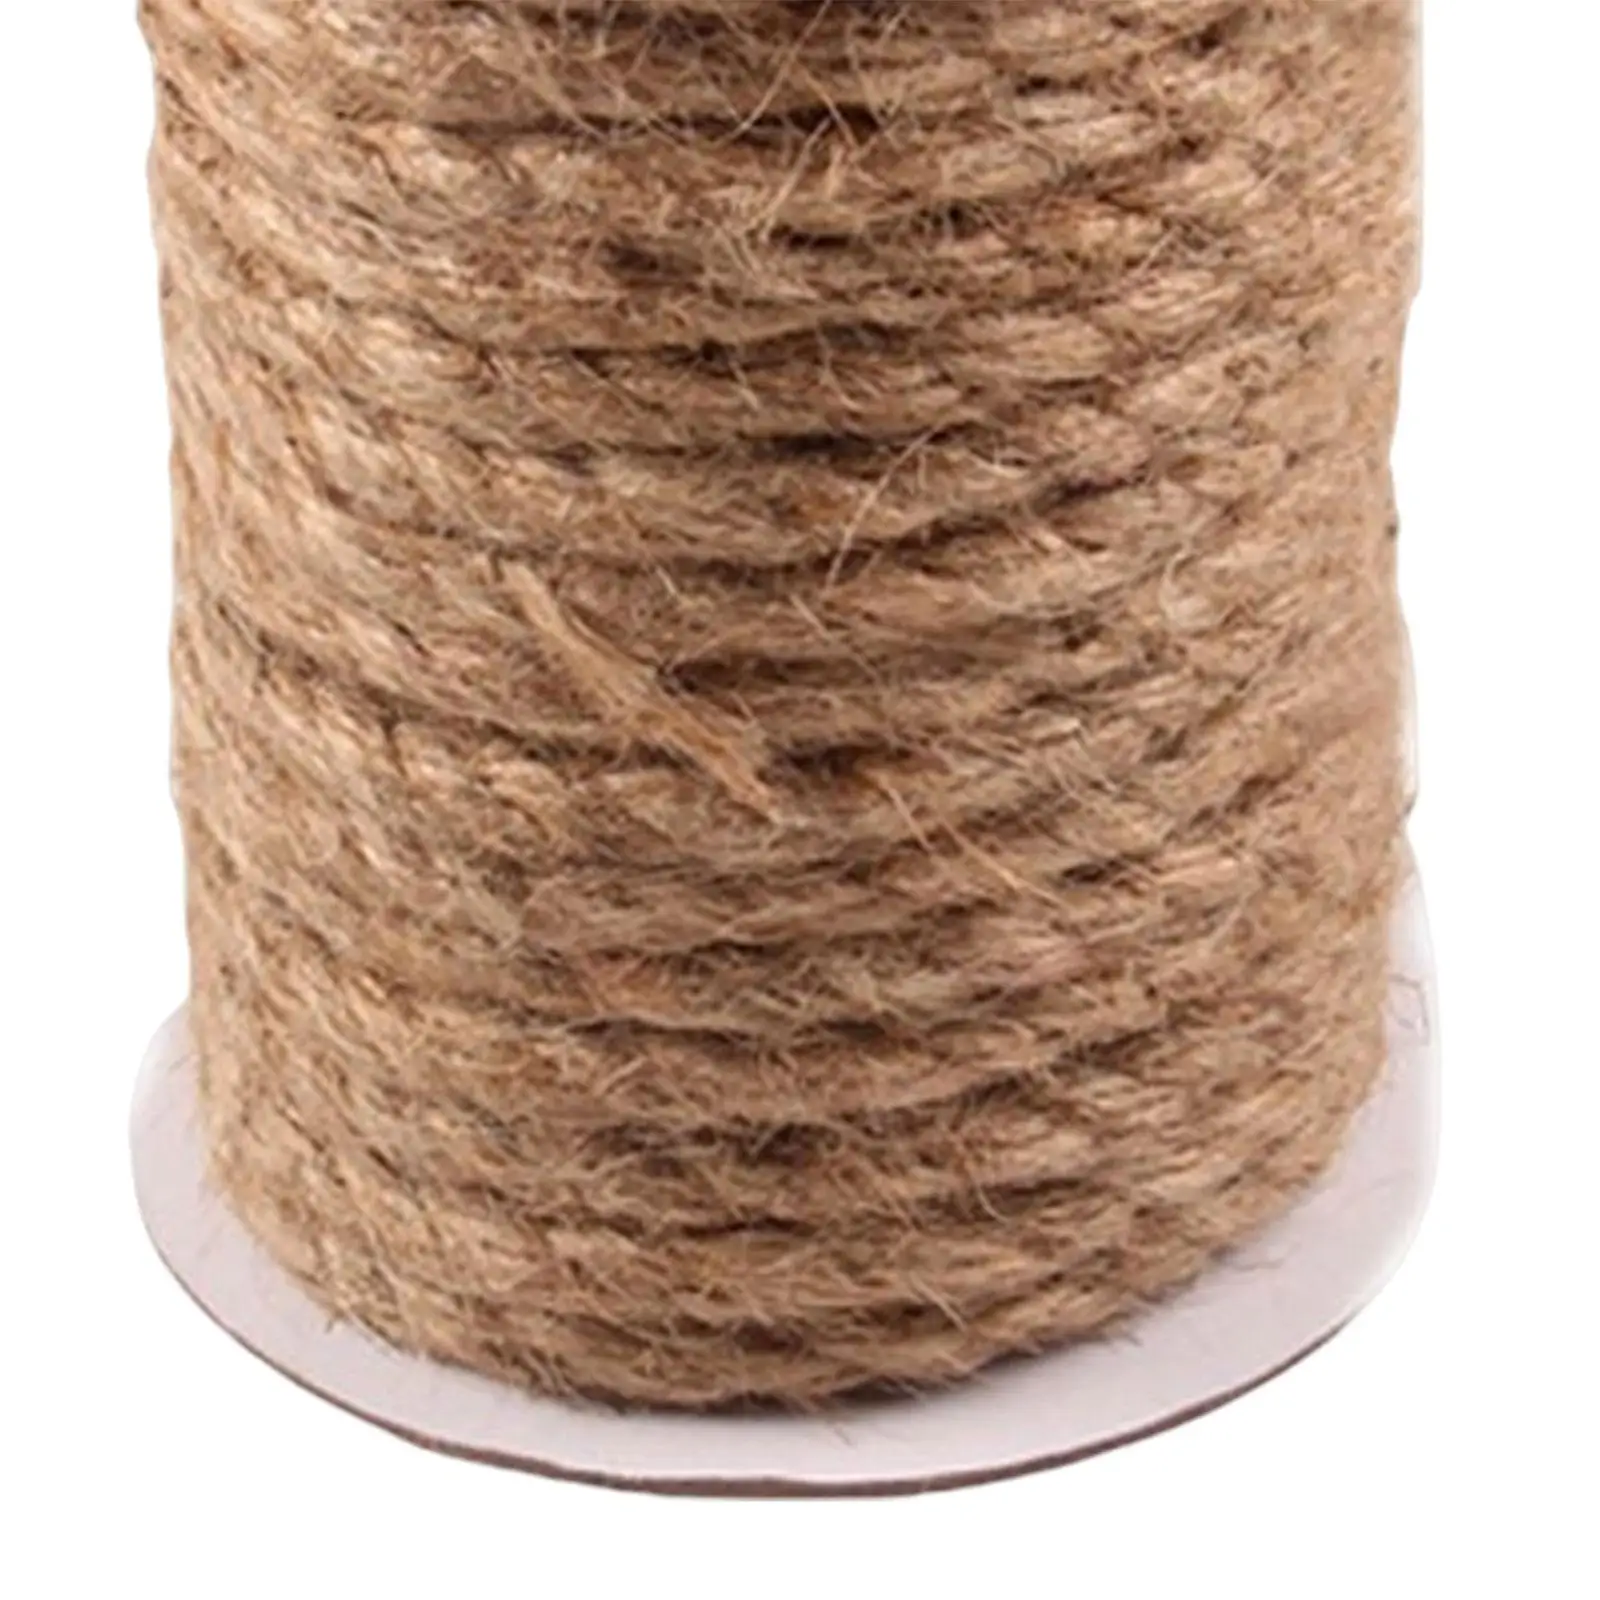 Burlap Twine Rope 15M Thick Multipurpose Hand Woven 8mm Jute Rope for Gardening Pet Toys DIY Projects Gift Wrapping